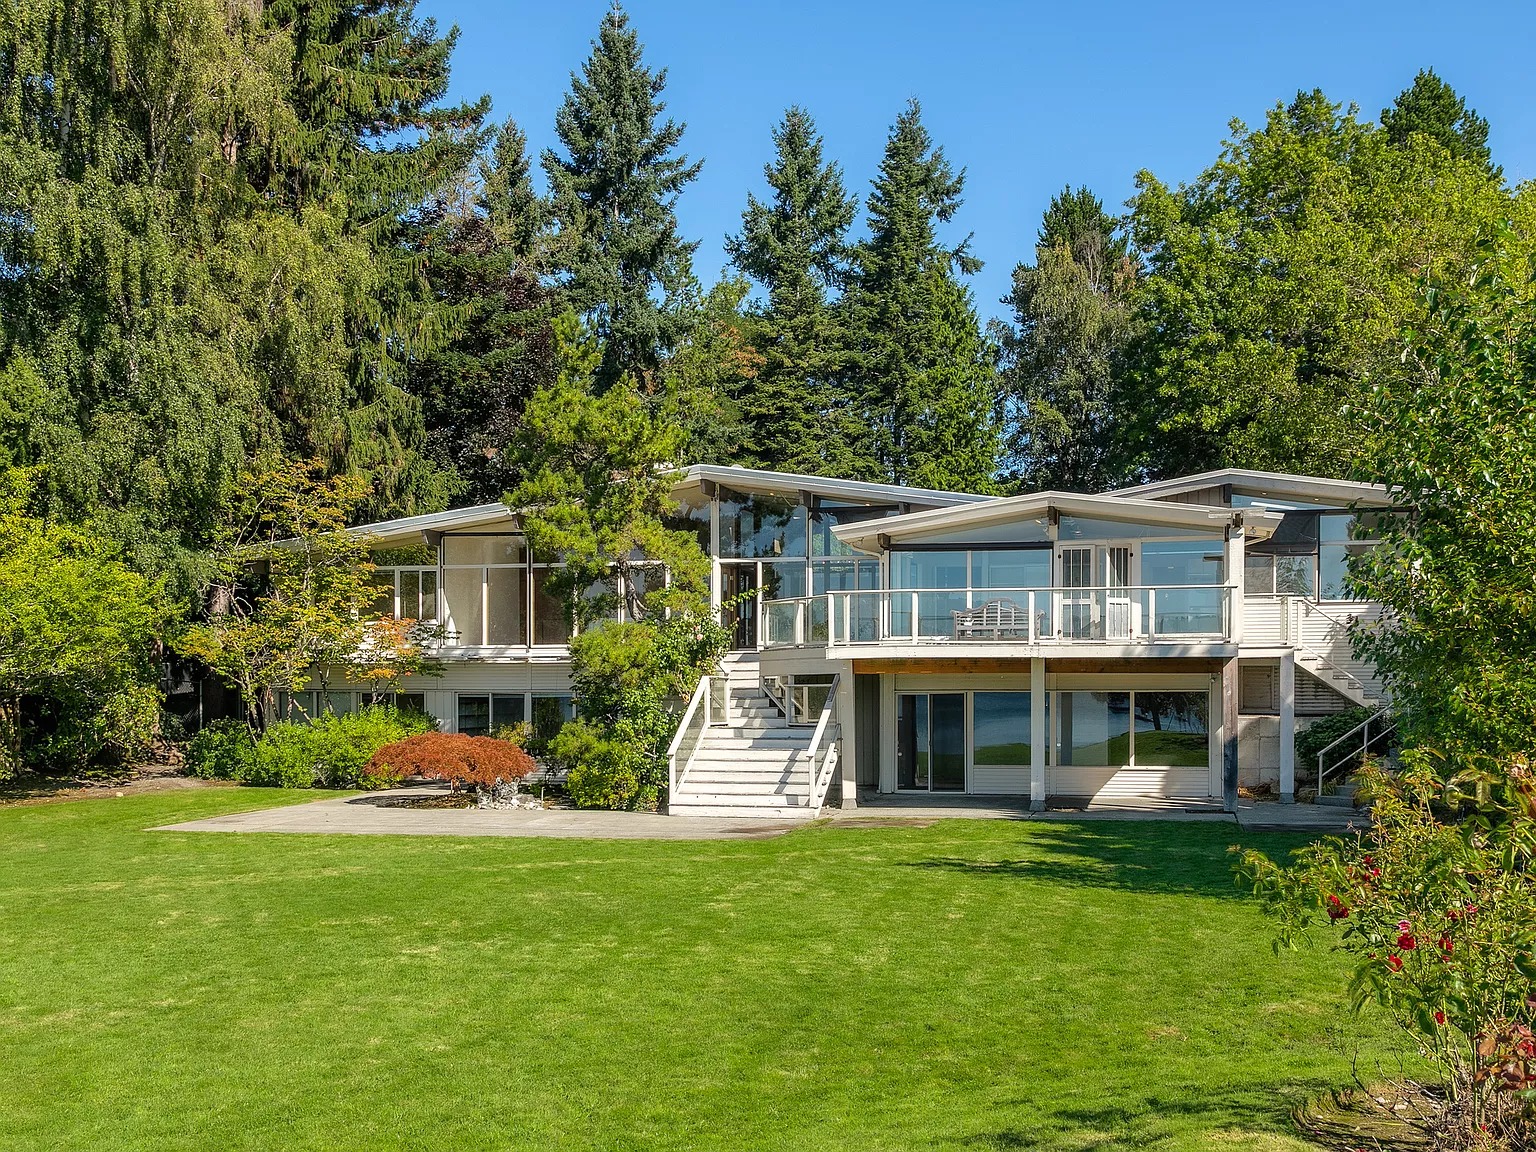 7935 Overlake Dr W, Medina, WA 98039 - $20,000,000 home for sale, house images, photos and pics gallery